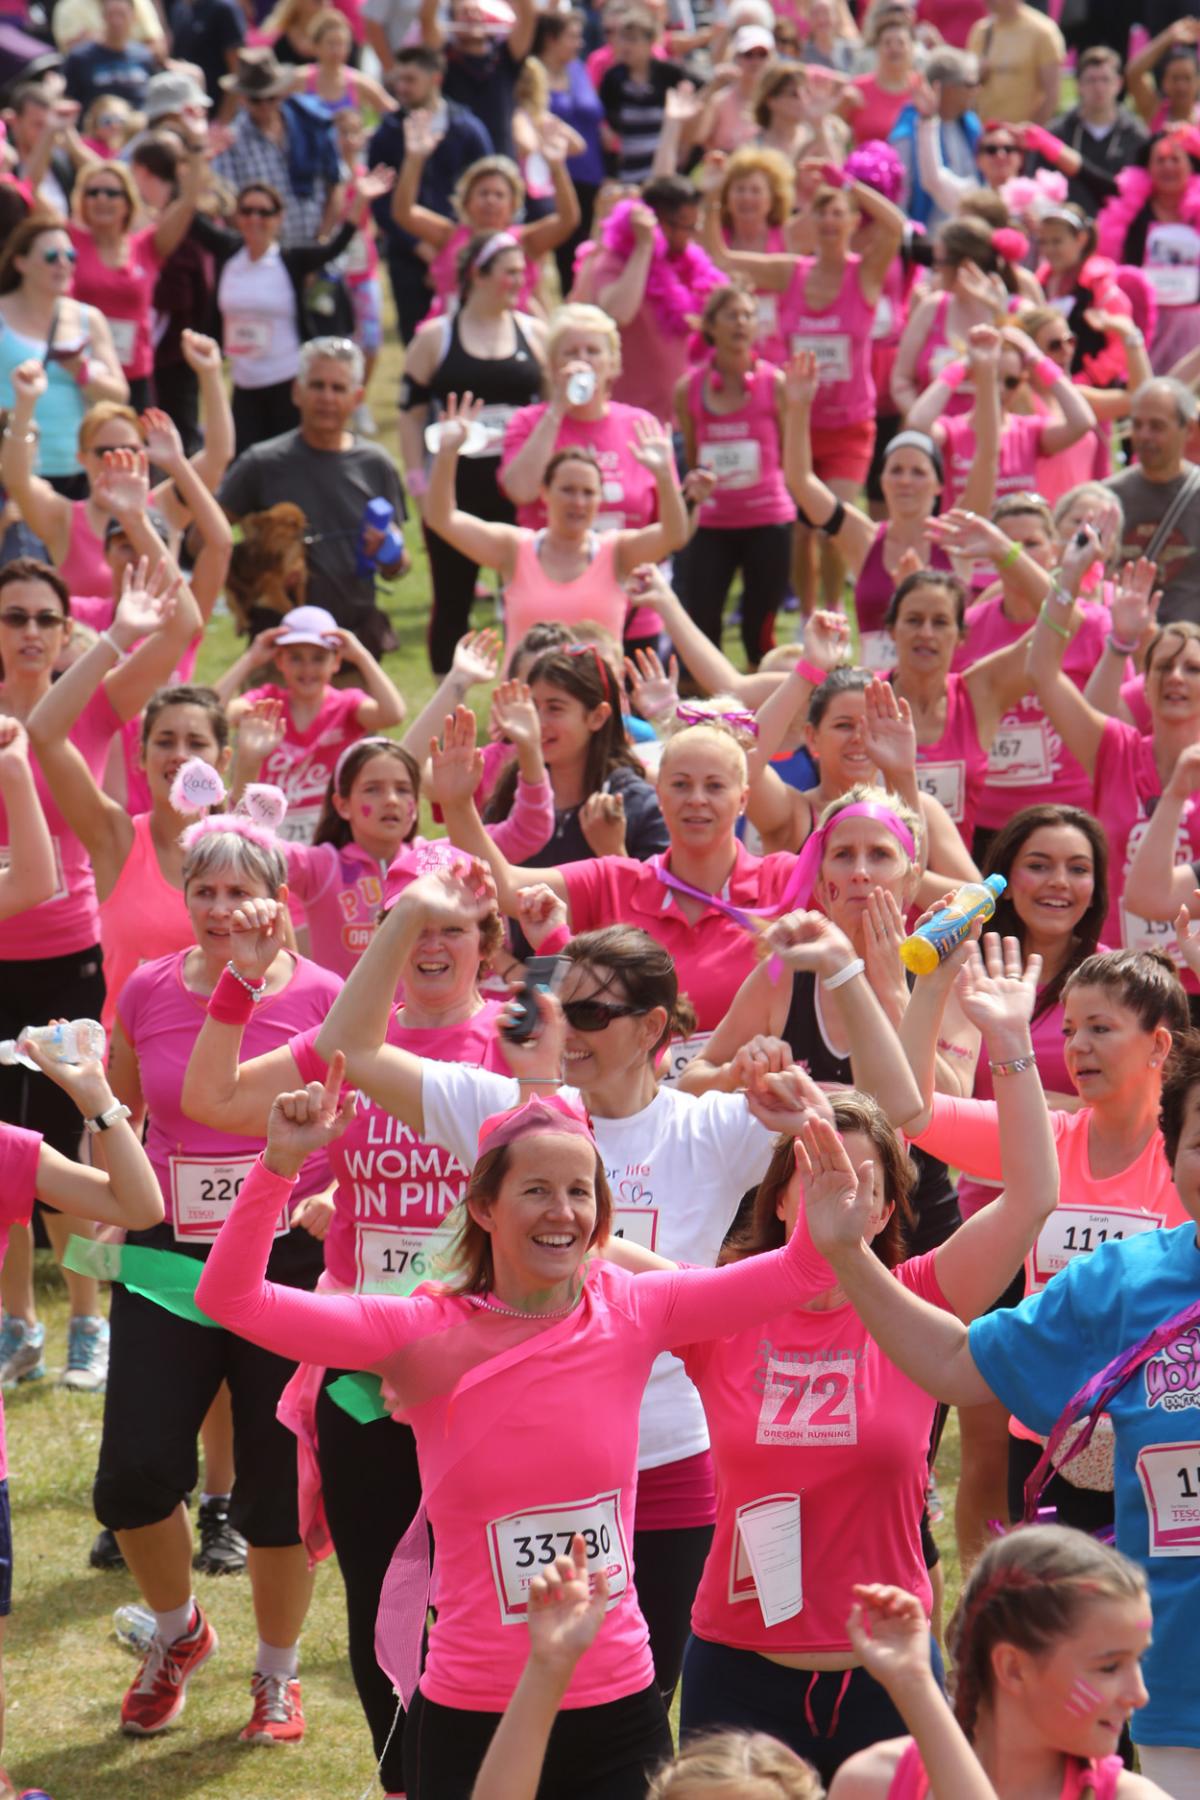 All the pictures from Poole Park Race For Life 5k on Sunday, June 21 2015 by Richard Crease